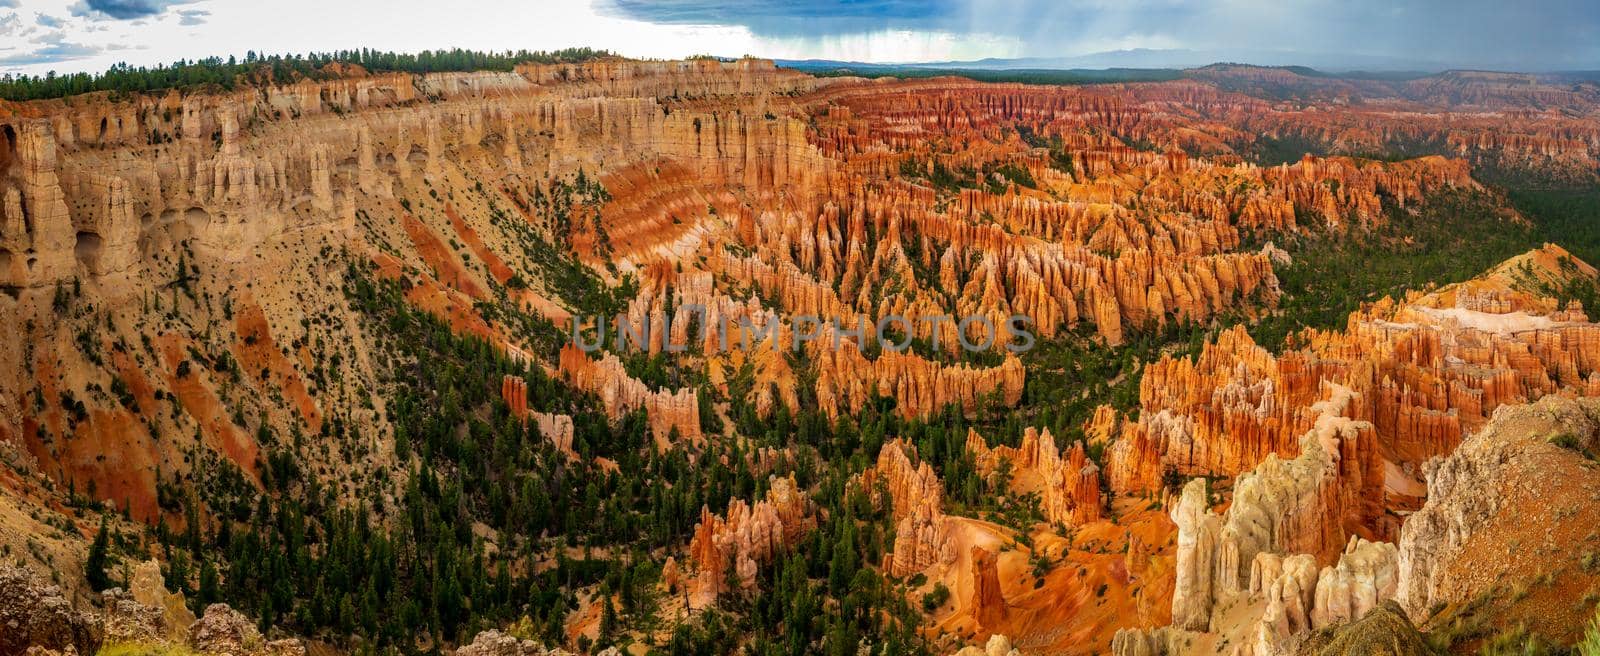 Bryce Amphitheater viewed from Bryce Point, in Bryce Canyon National Park, Utah